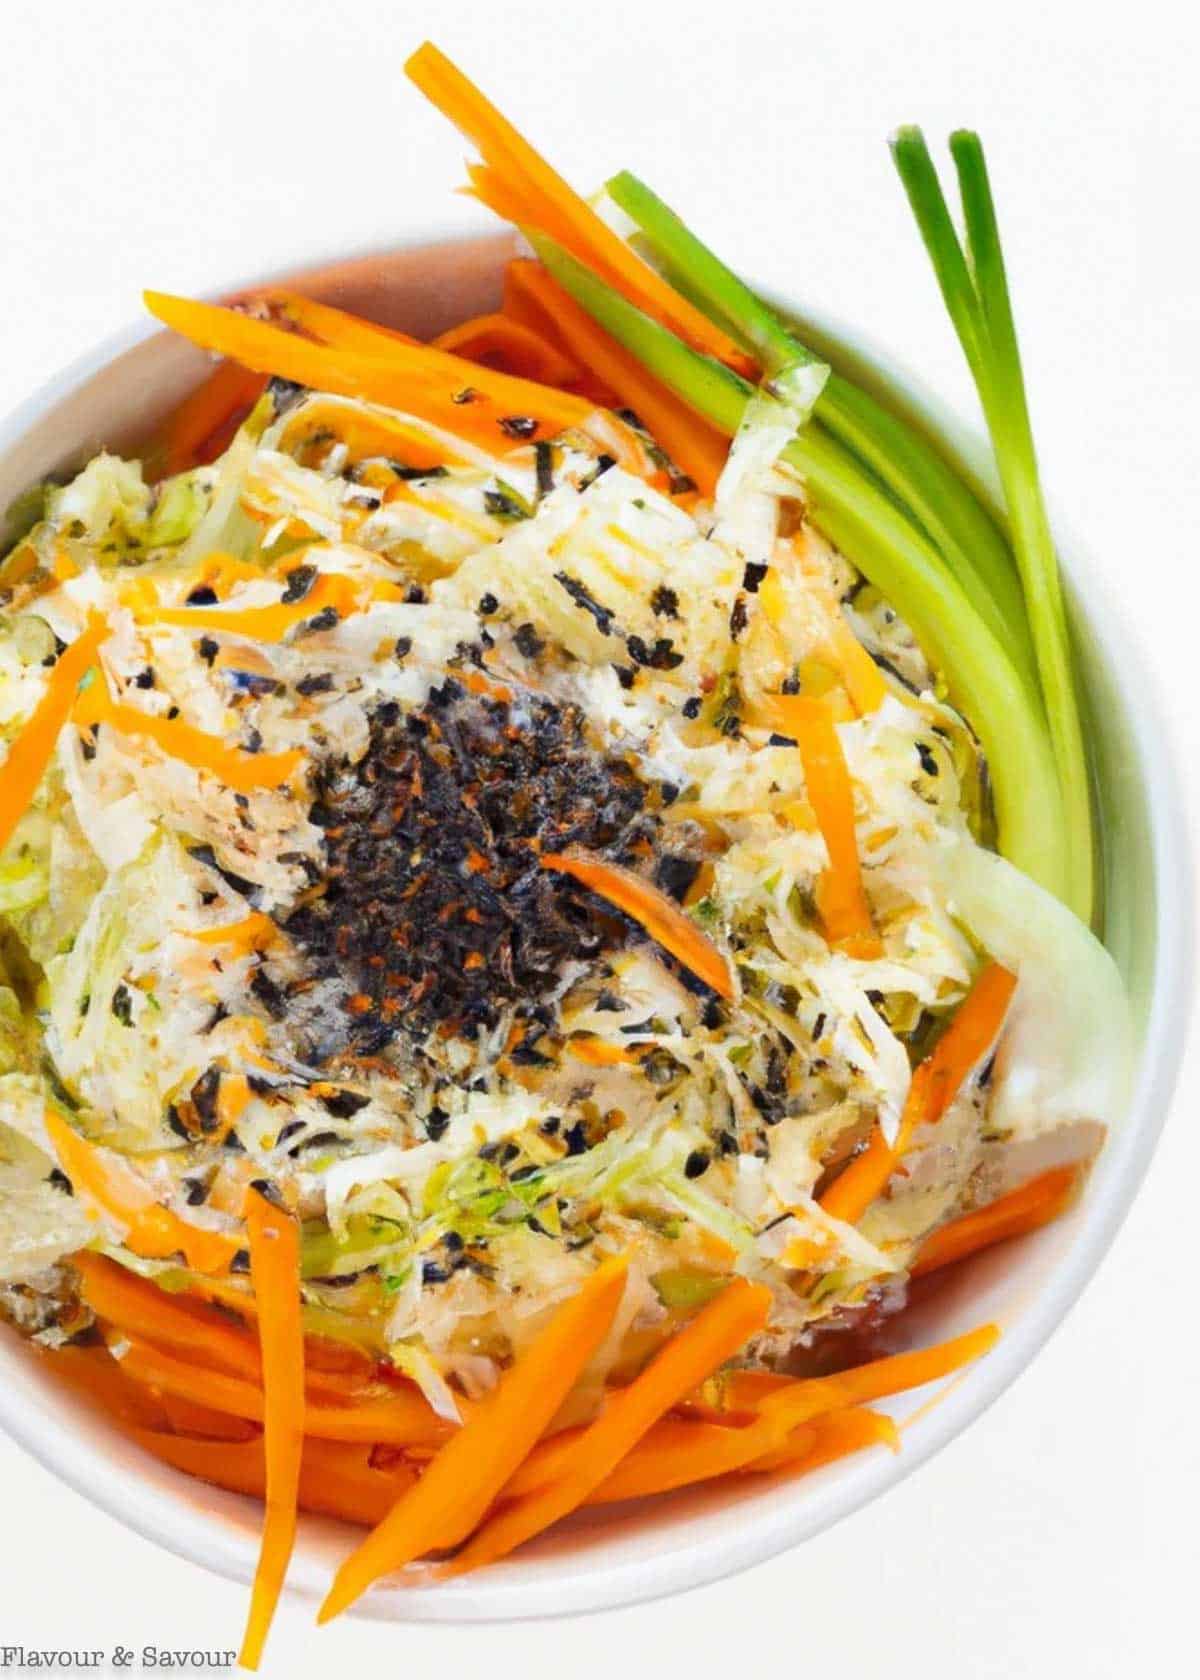 A bowl of Thai-style coleslaw with shredded cabbage, carrots, kohlrabi and green onions.